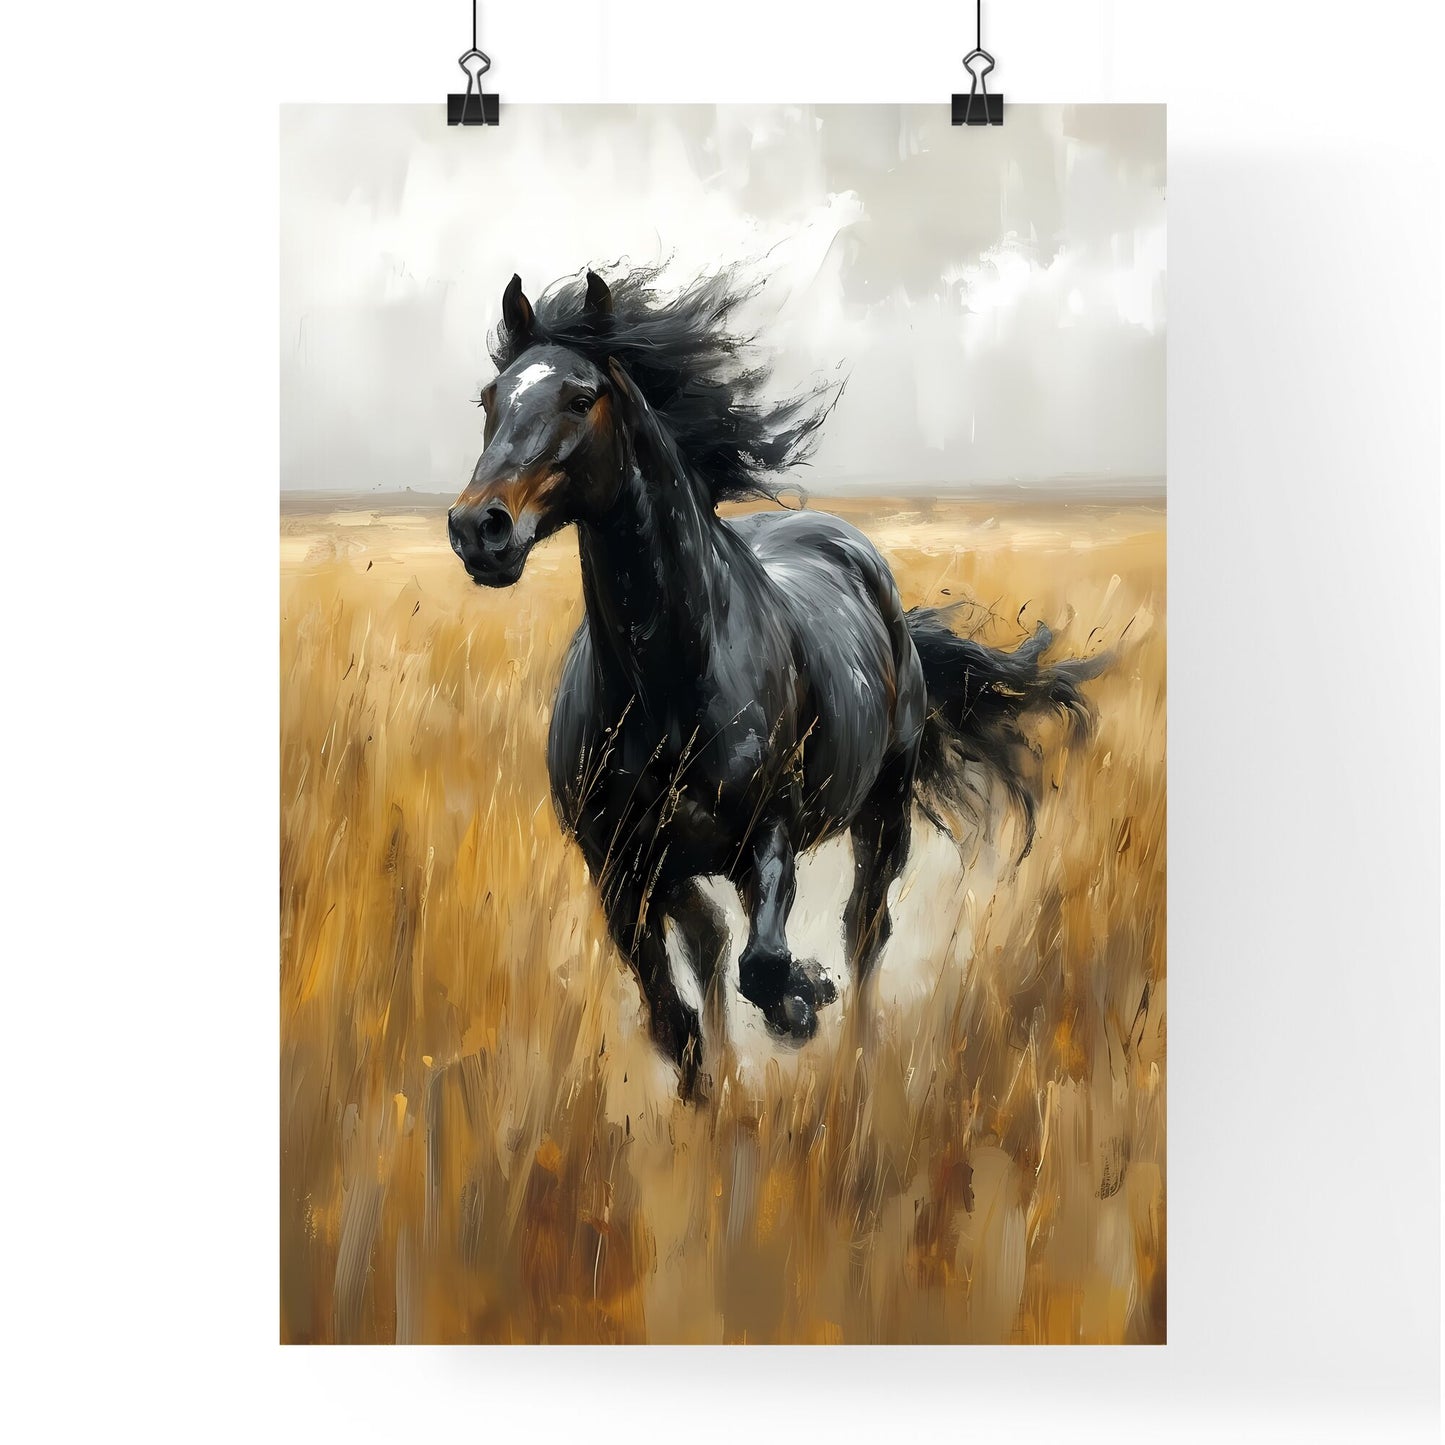 A vintage painting featuring a wild black horse - Art print of a horse running through a field Default Title